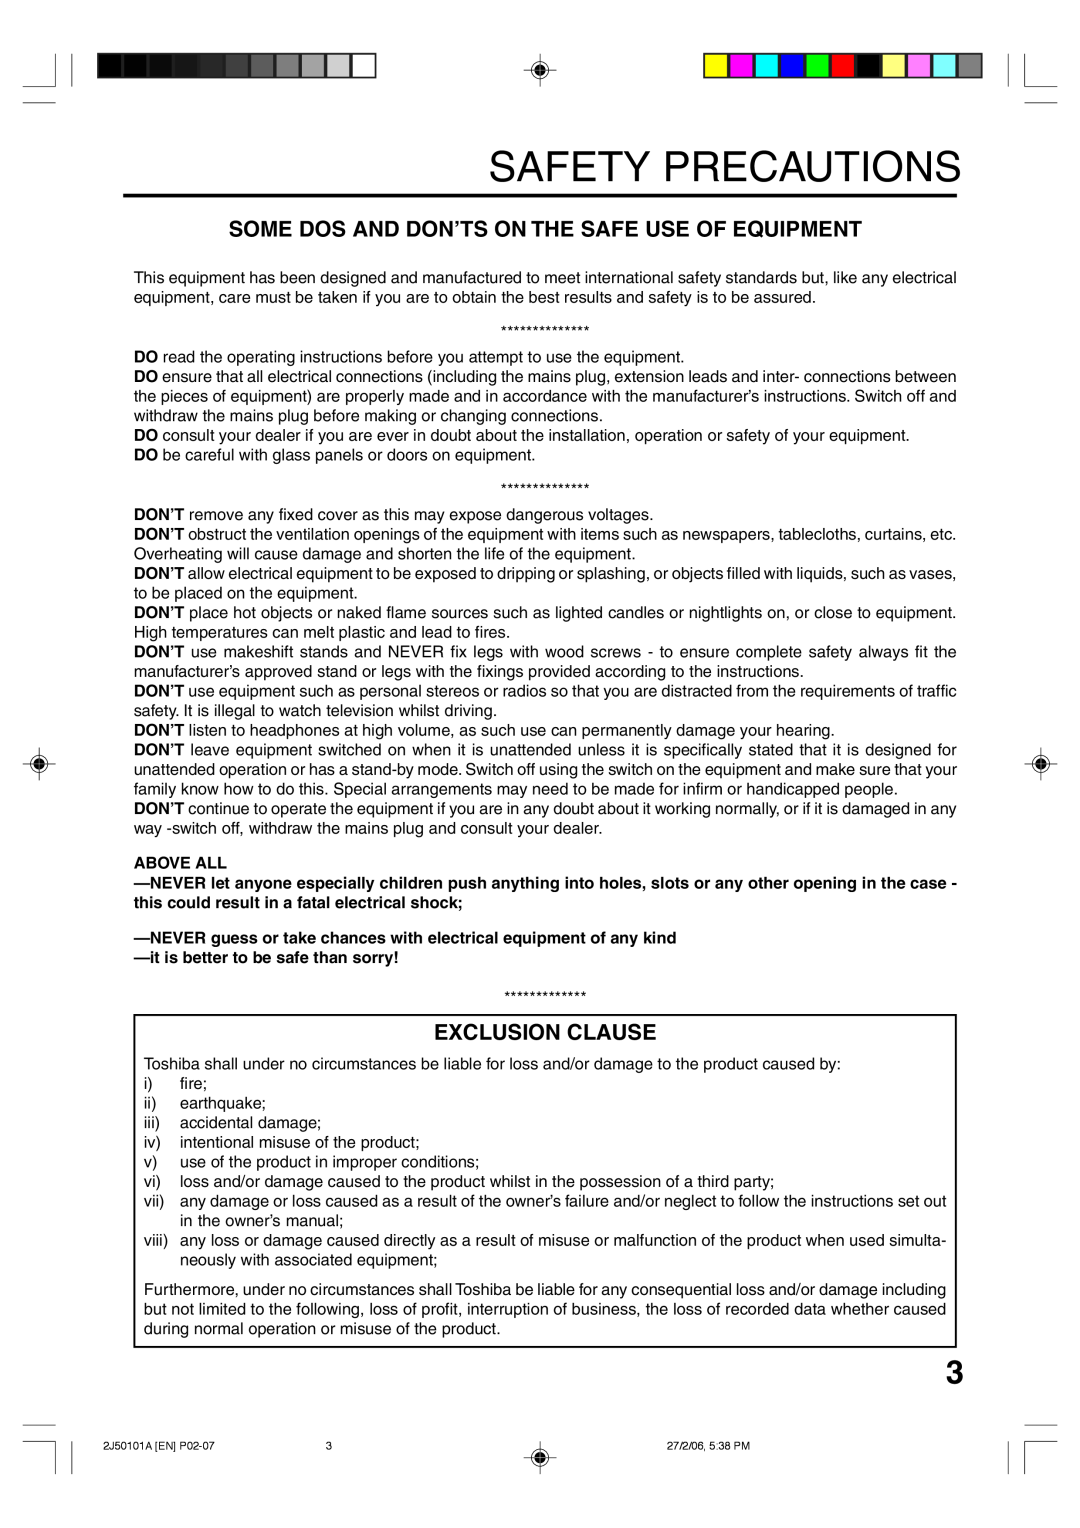 Toshiba SD-37VBSB manual Some Dos And Don’Ts On The Safe Use Of Equipment, Exclusion Clause, Safety Precautions, Above All 